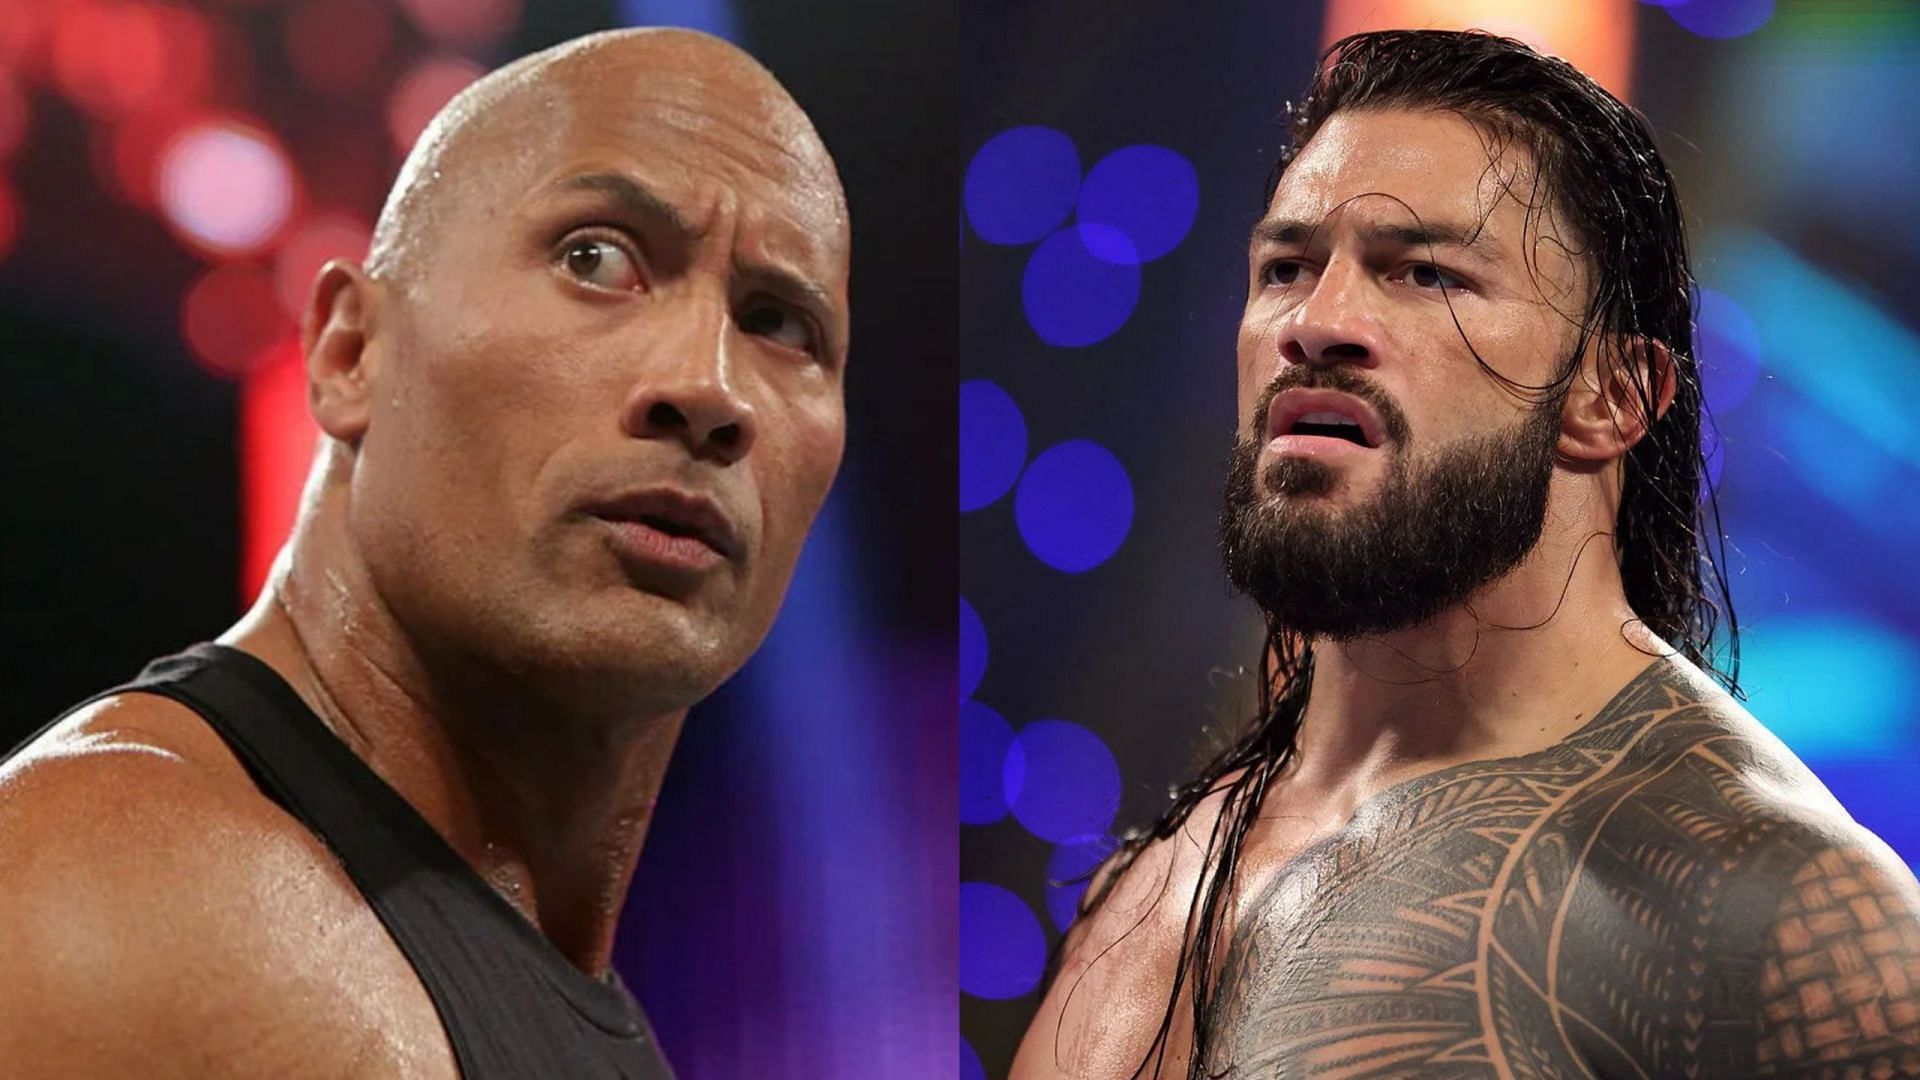 The Rock (left); Roman Reigns (right)